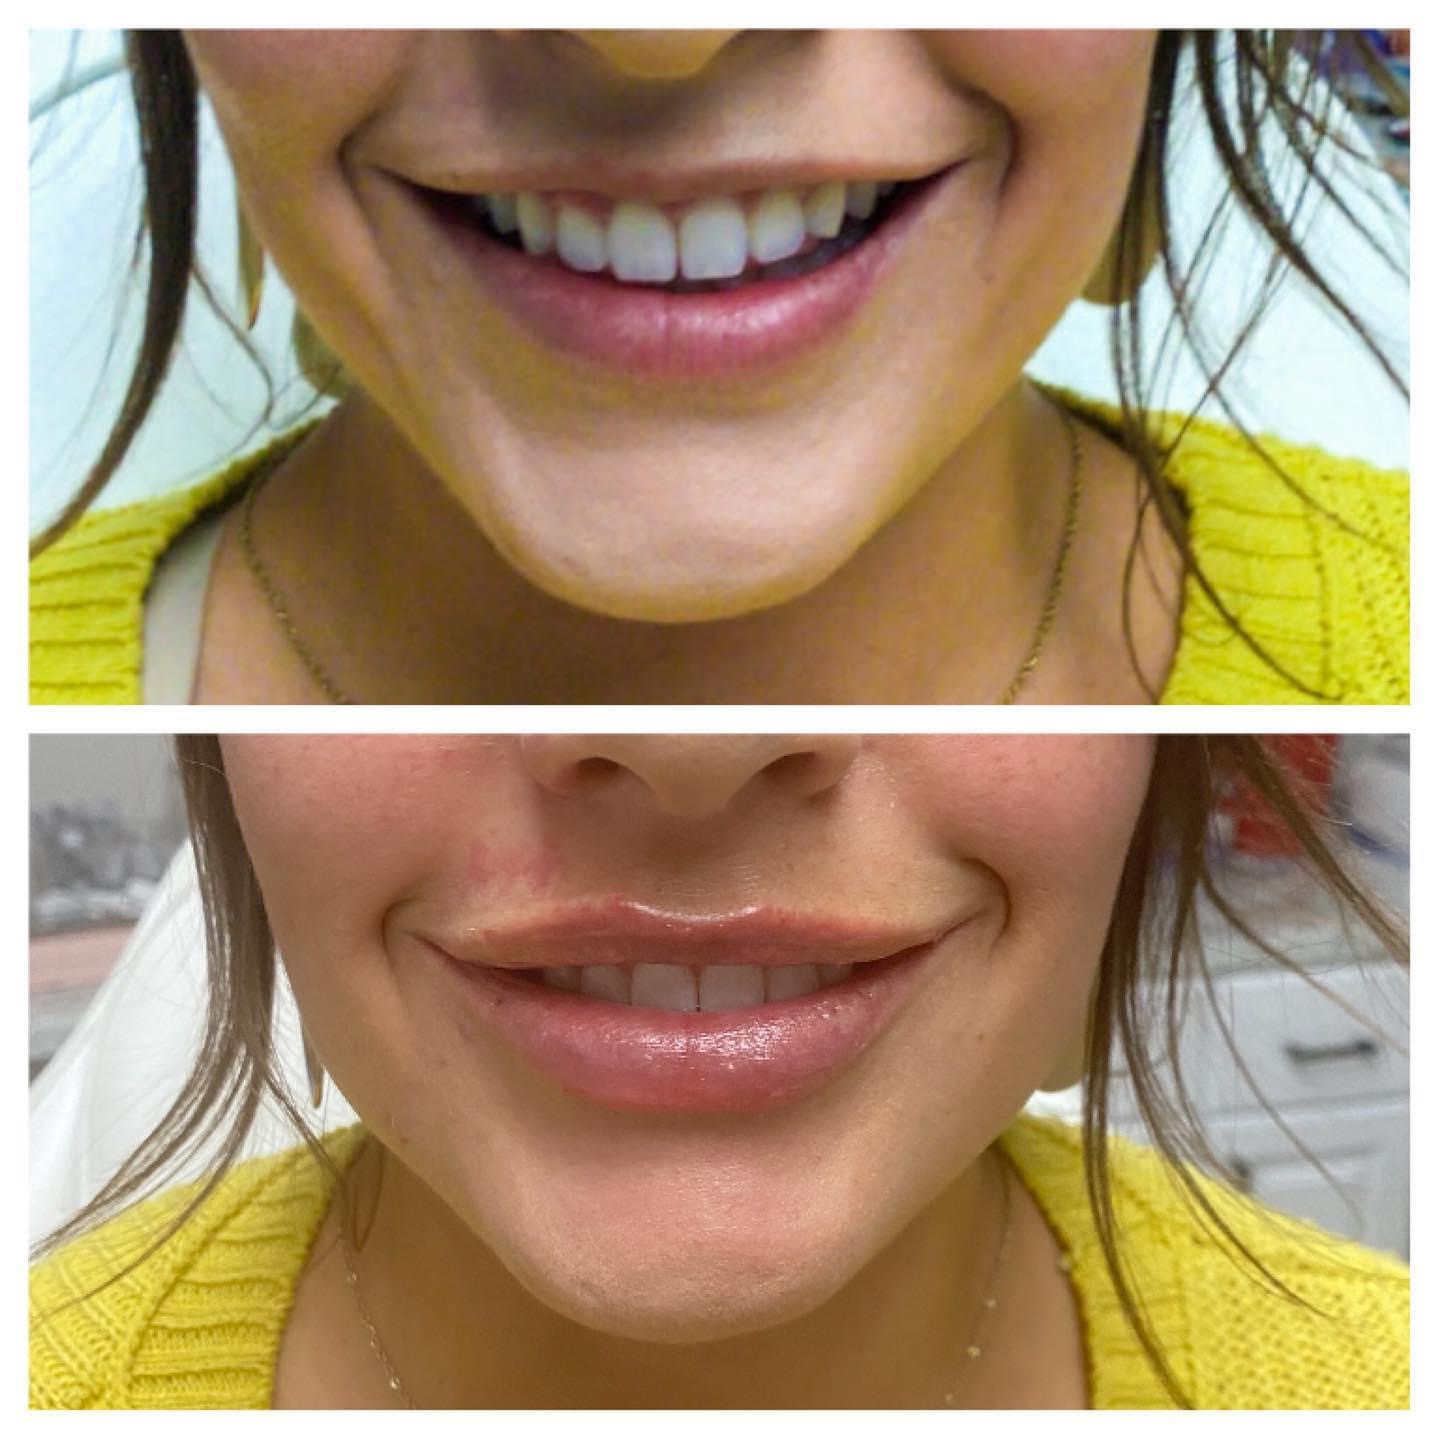 Dermal fillers | Lady | Smile | Before and after | Skintuition Medical Aesthetics